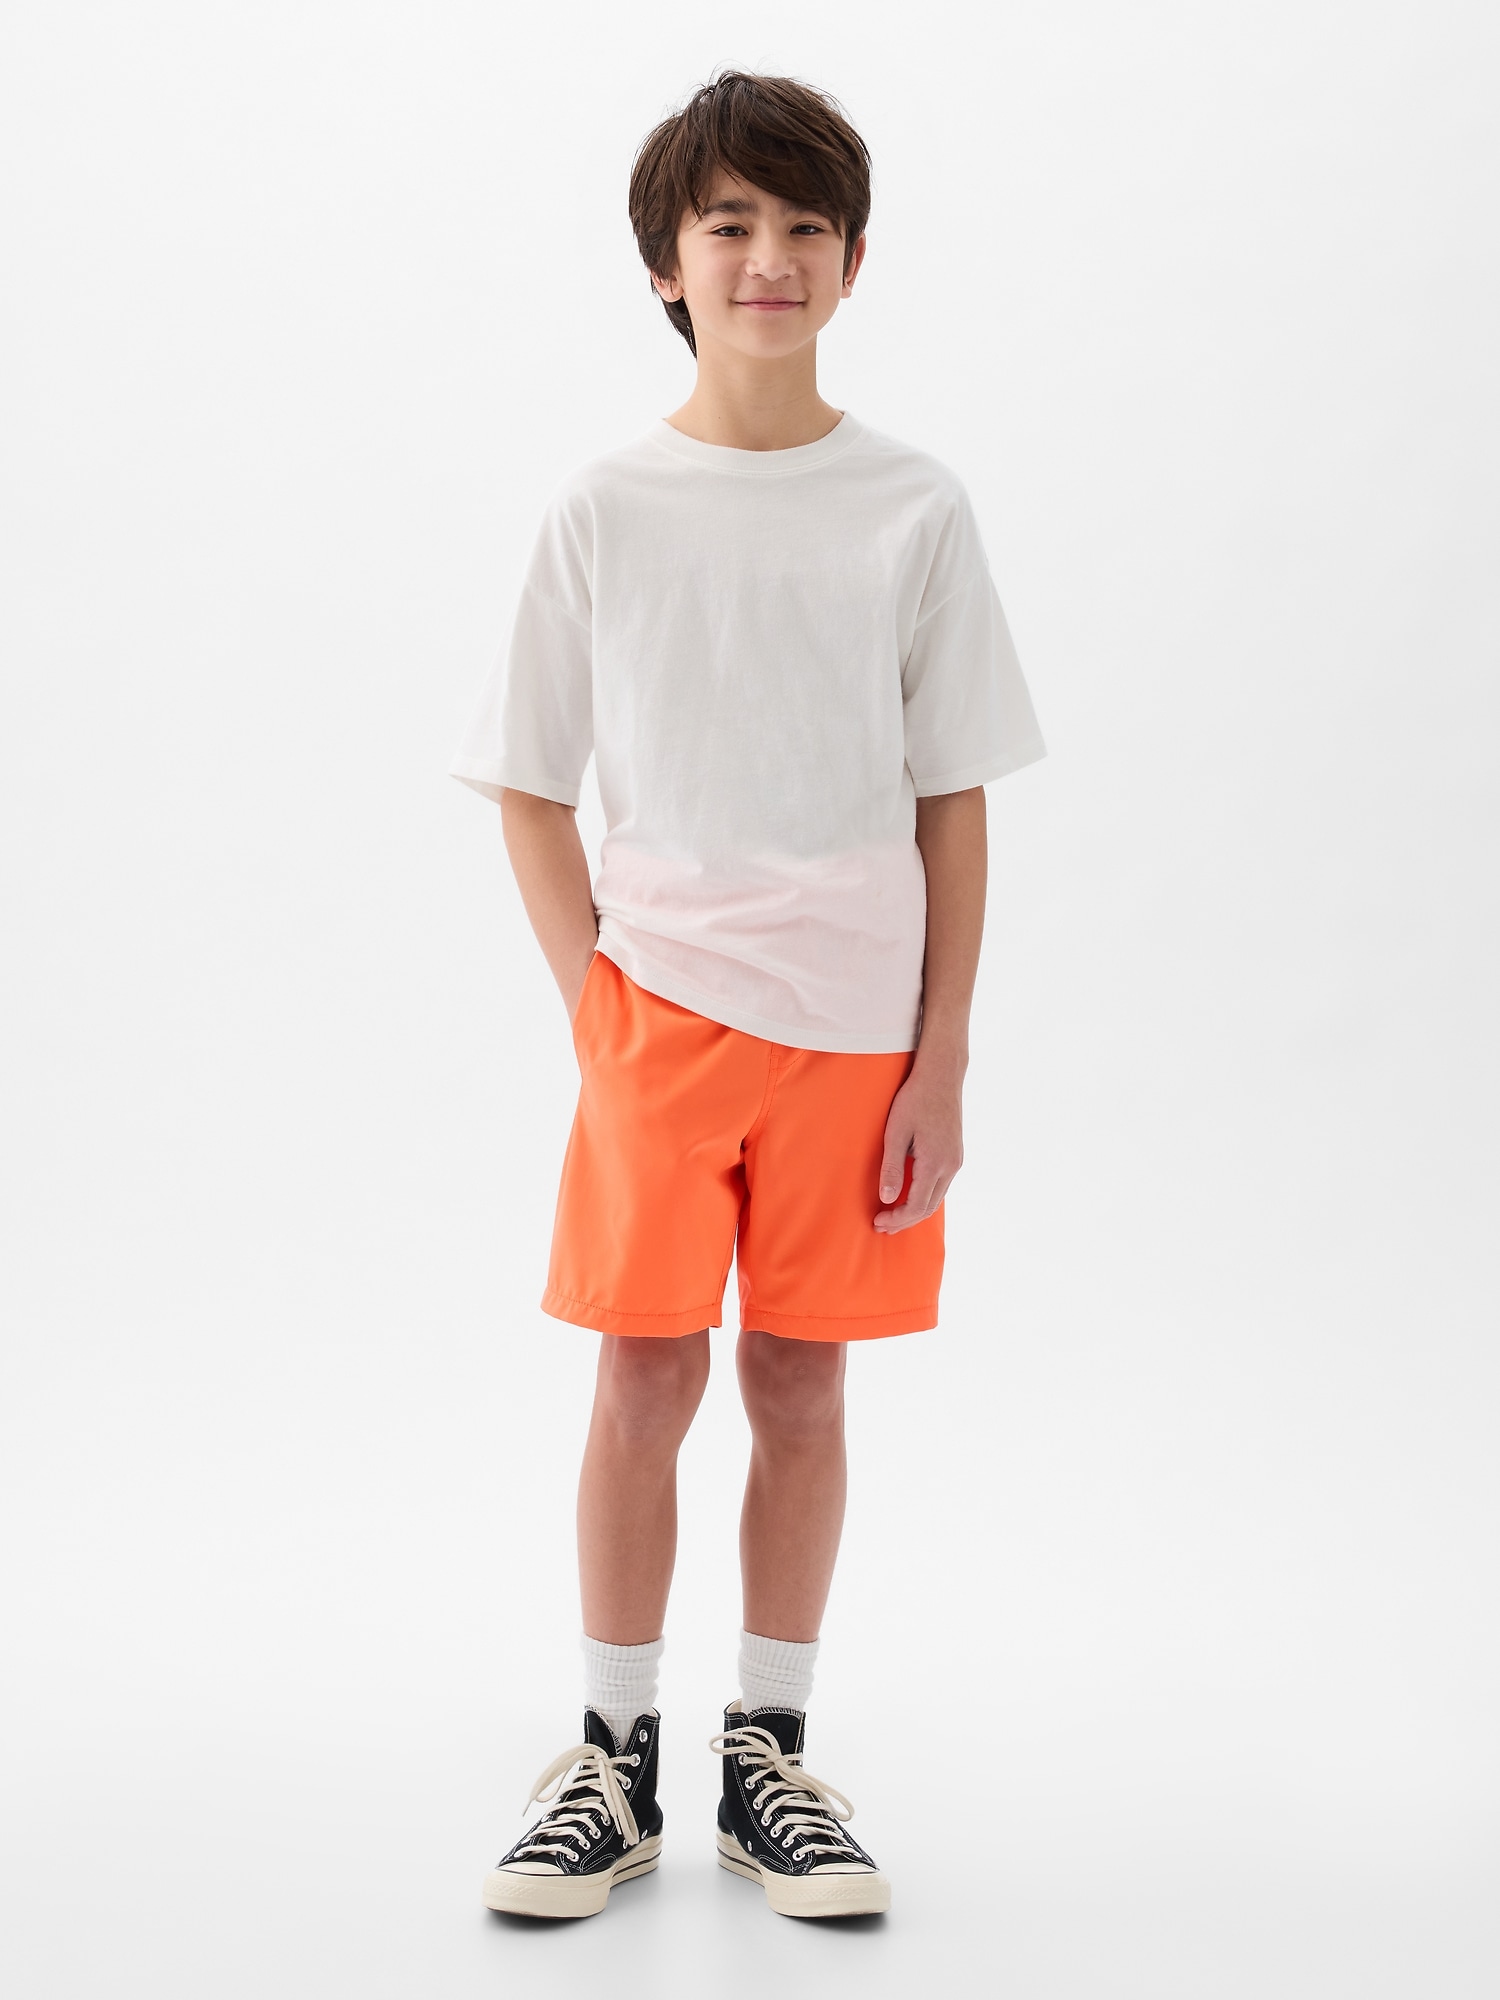 Kids Quick-Dry Lined Shorts | Gap